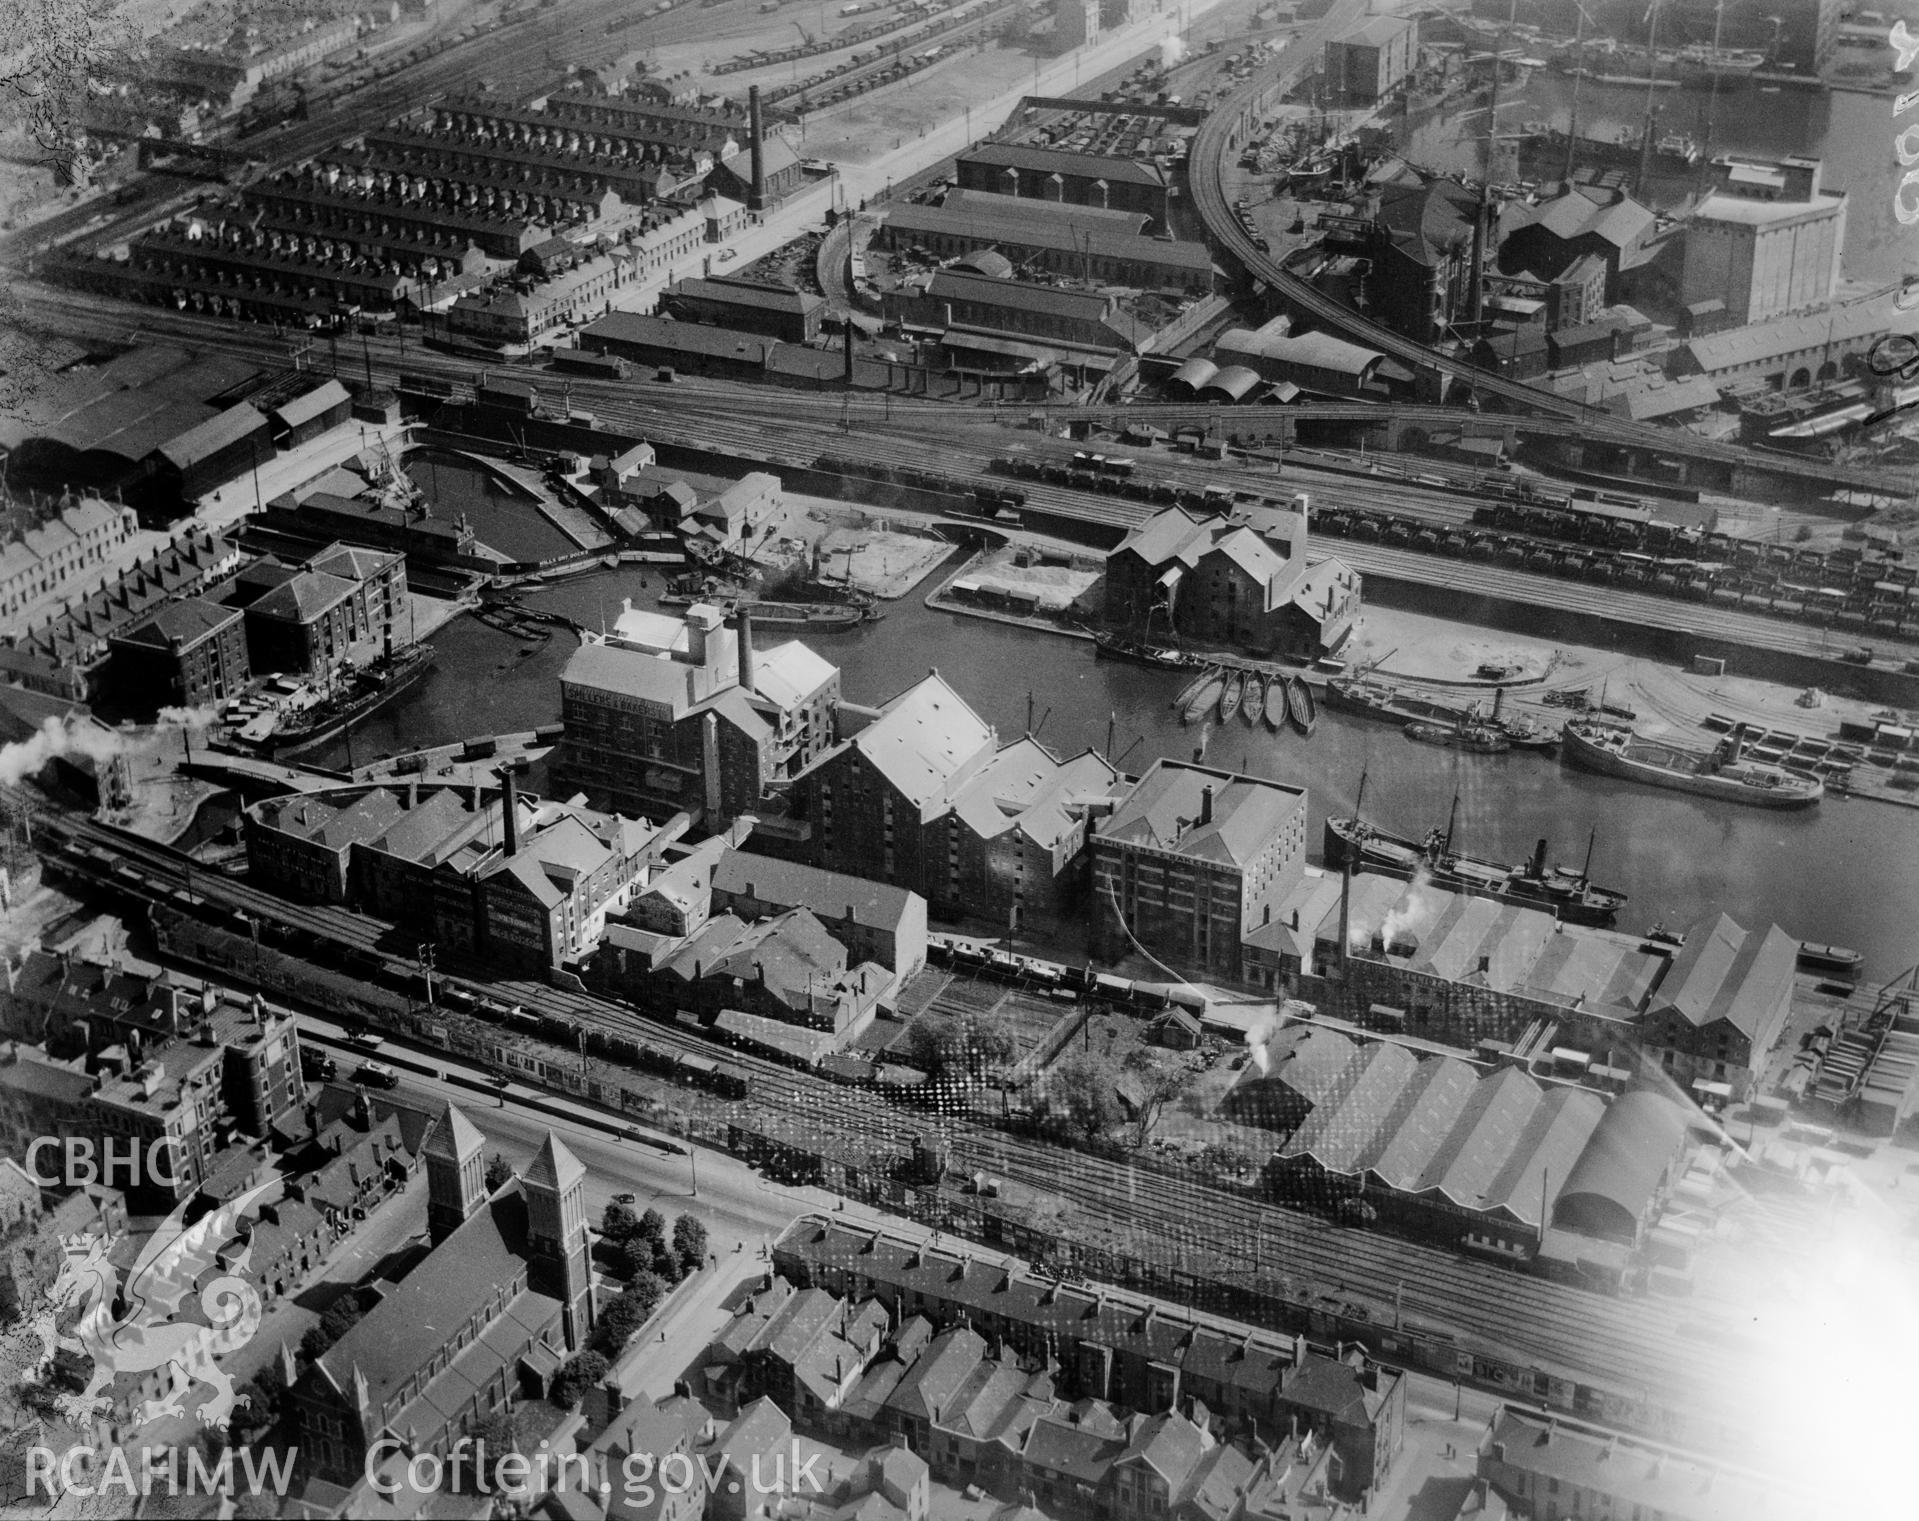 View of Bute West Dock, Cardiff, oblique aerial view. 5?x4? black and white glass plate negative.